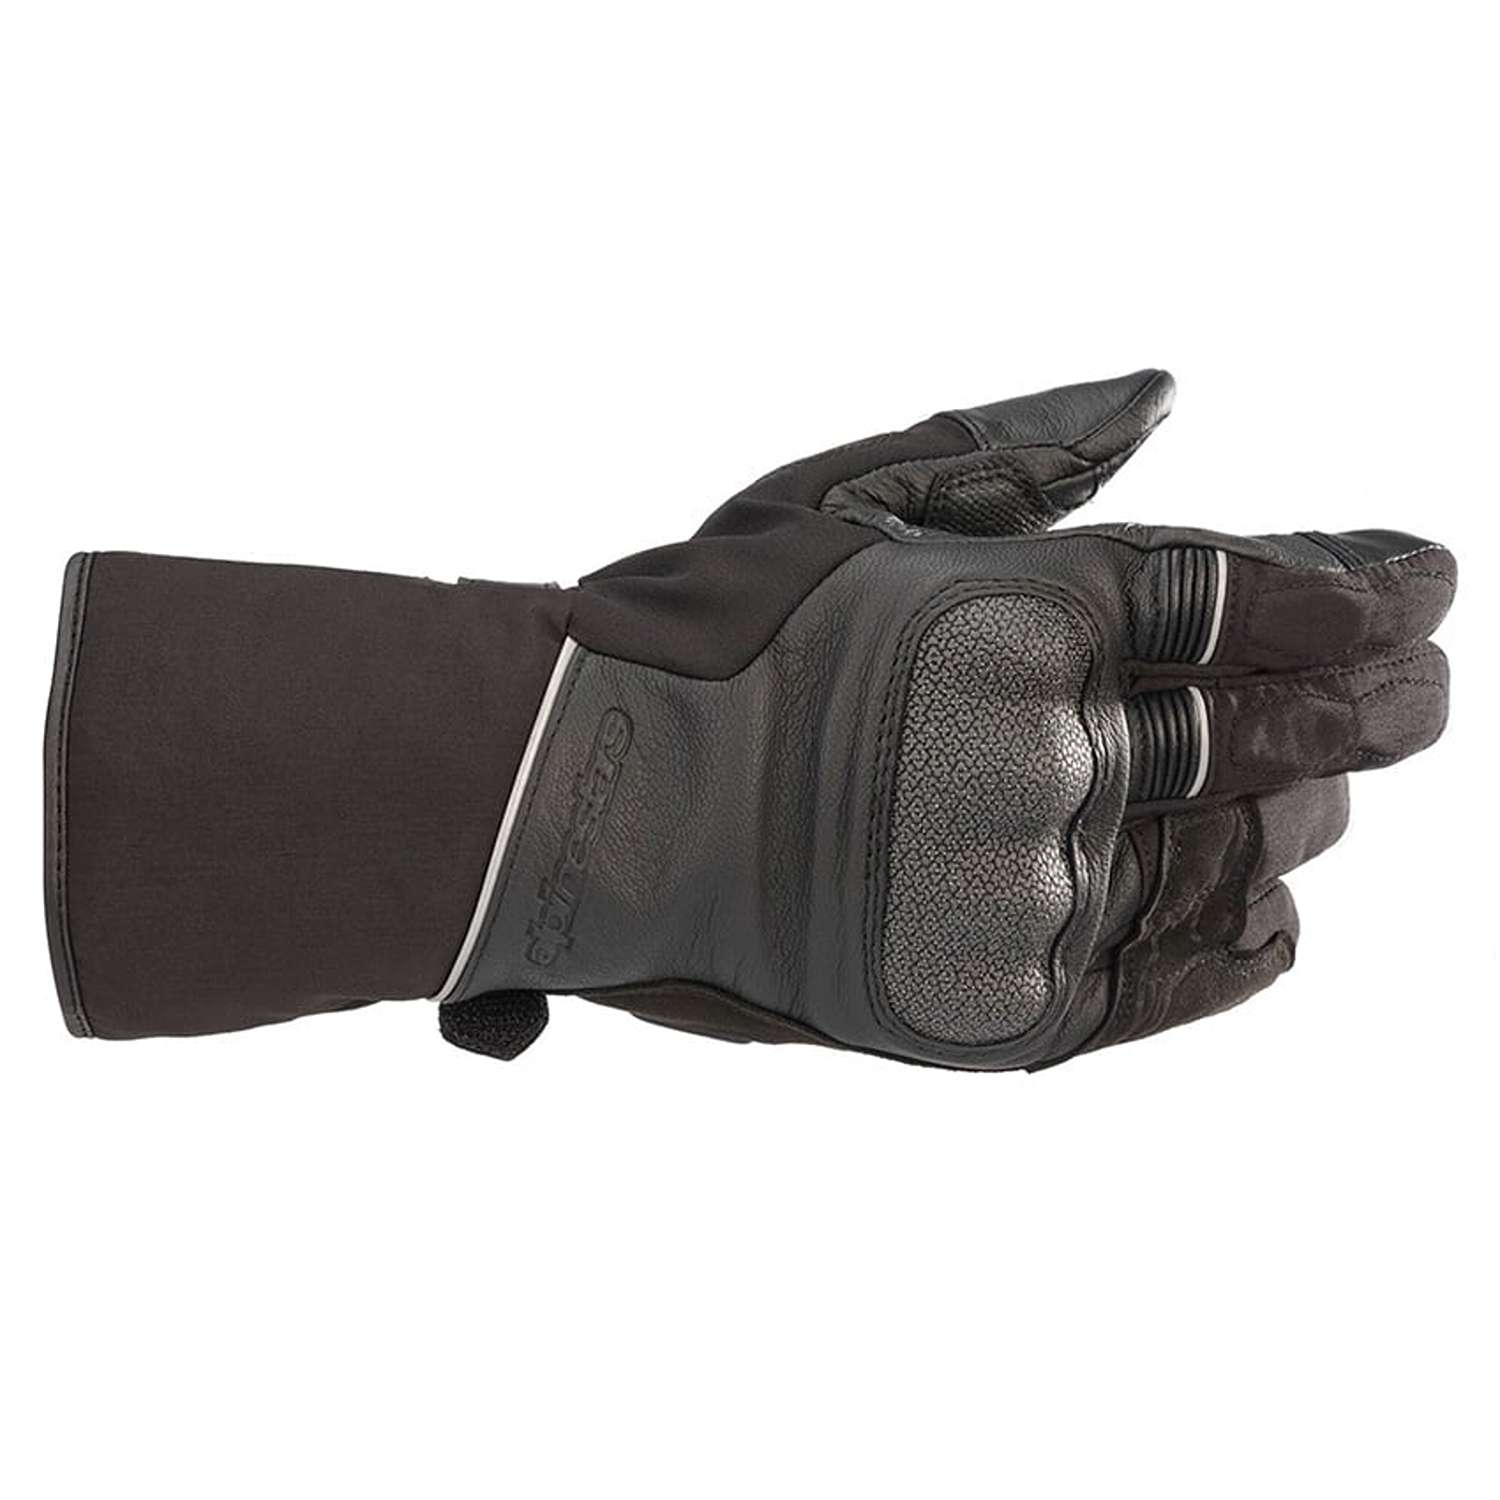 Image of EU Alpinestars Wr-2 V2 Gore-Tex Gloves With Gore Grip Technology Black Taille 3XL